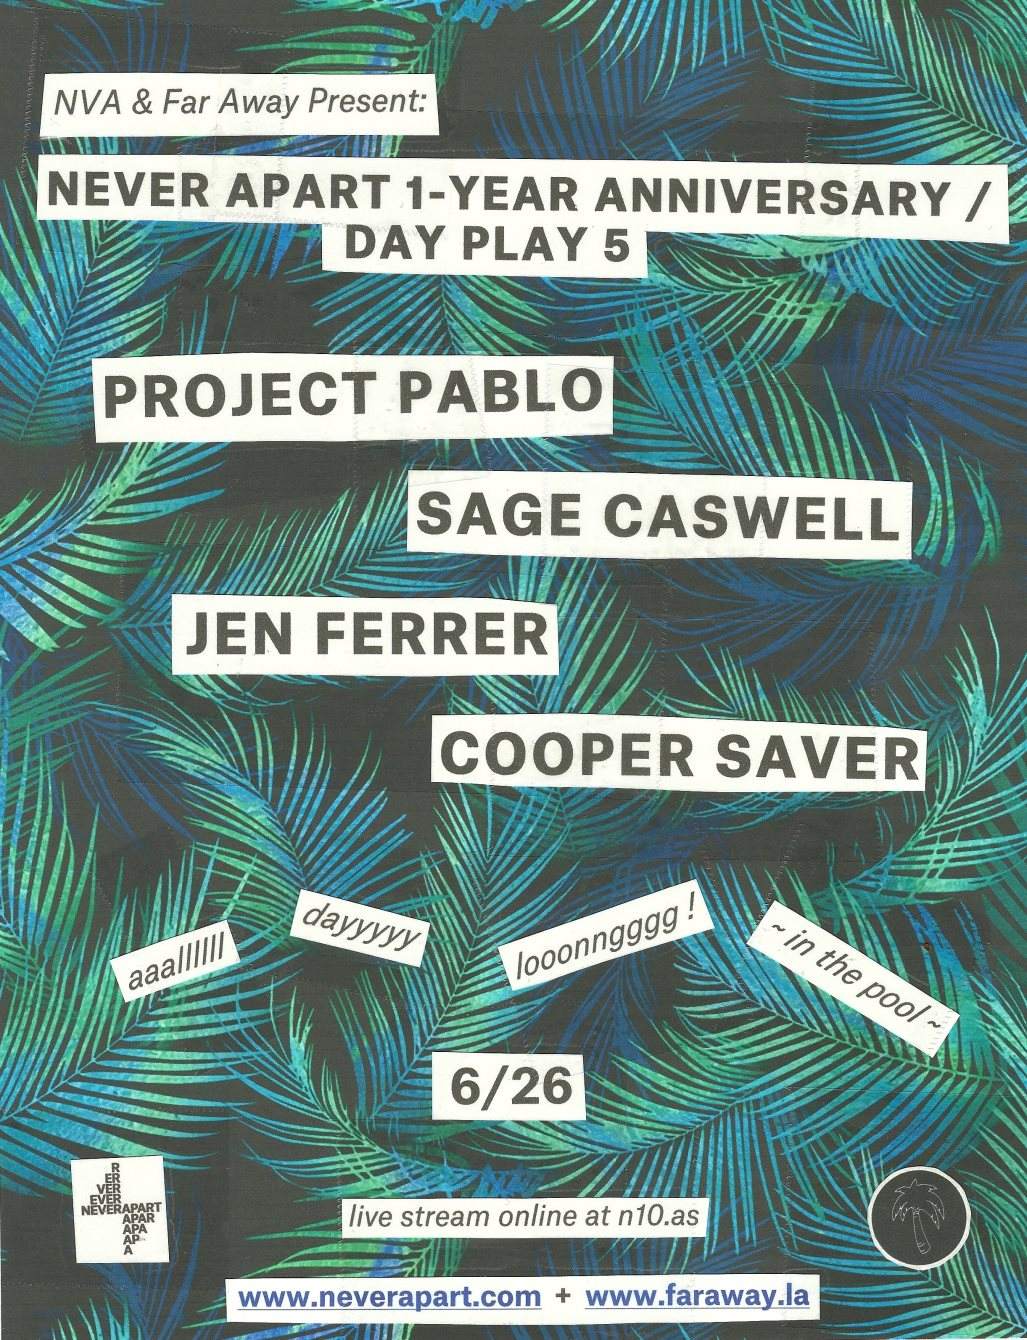 Day Play 5: Project Pablo / Sage Caswell / Cooper Saver / Jen Ferrer - Página frontal